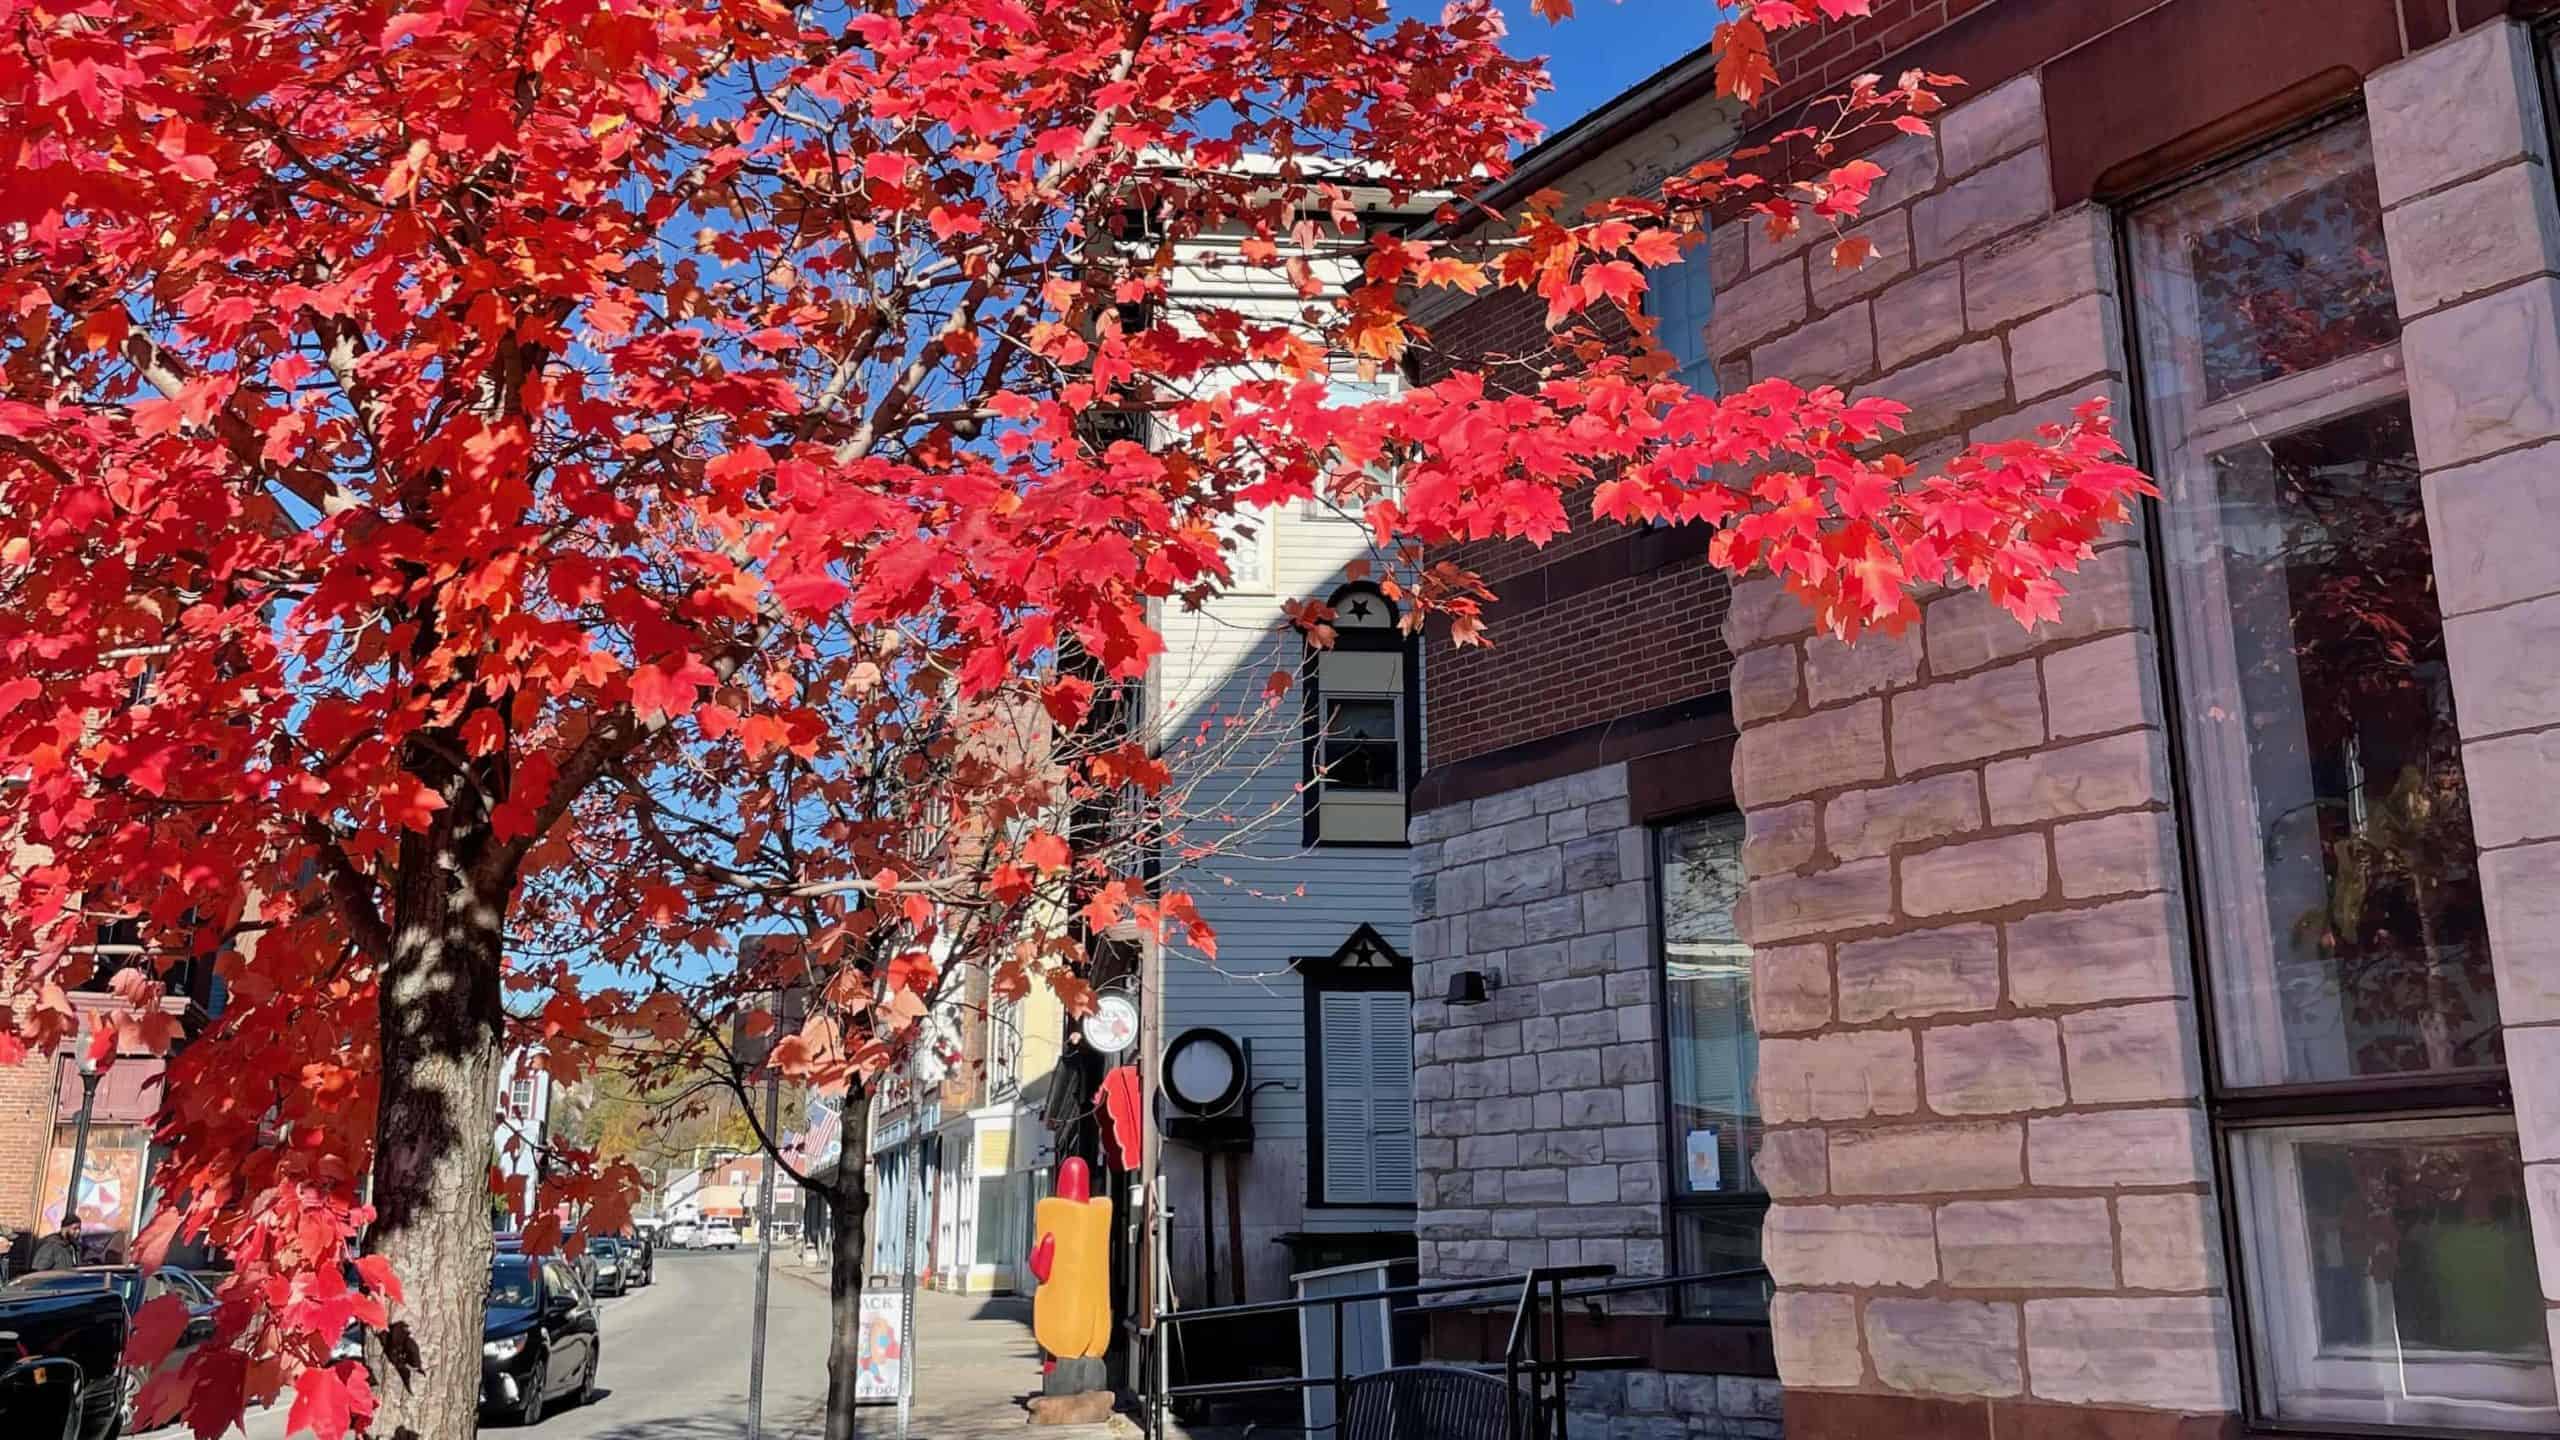 A late maple tree turns blazing red on Eagle Street in North Adams.